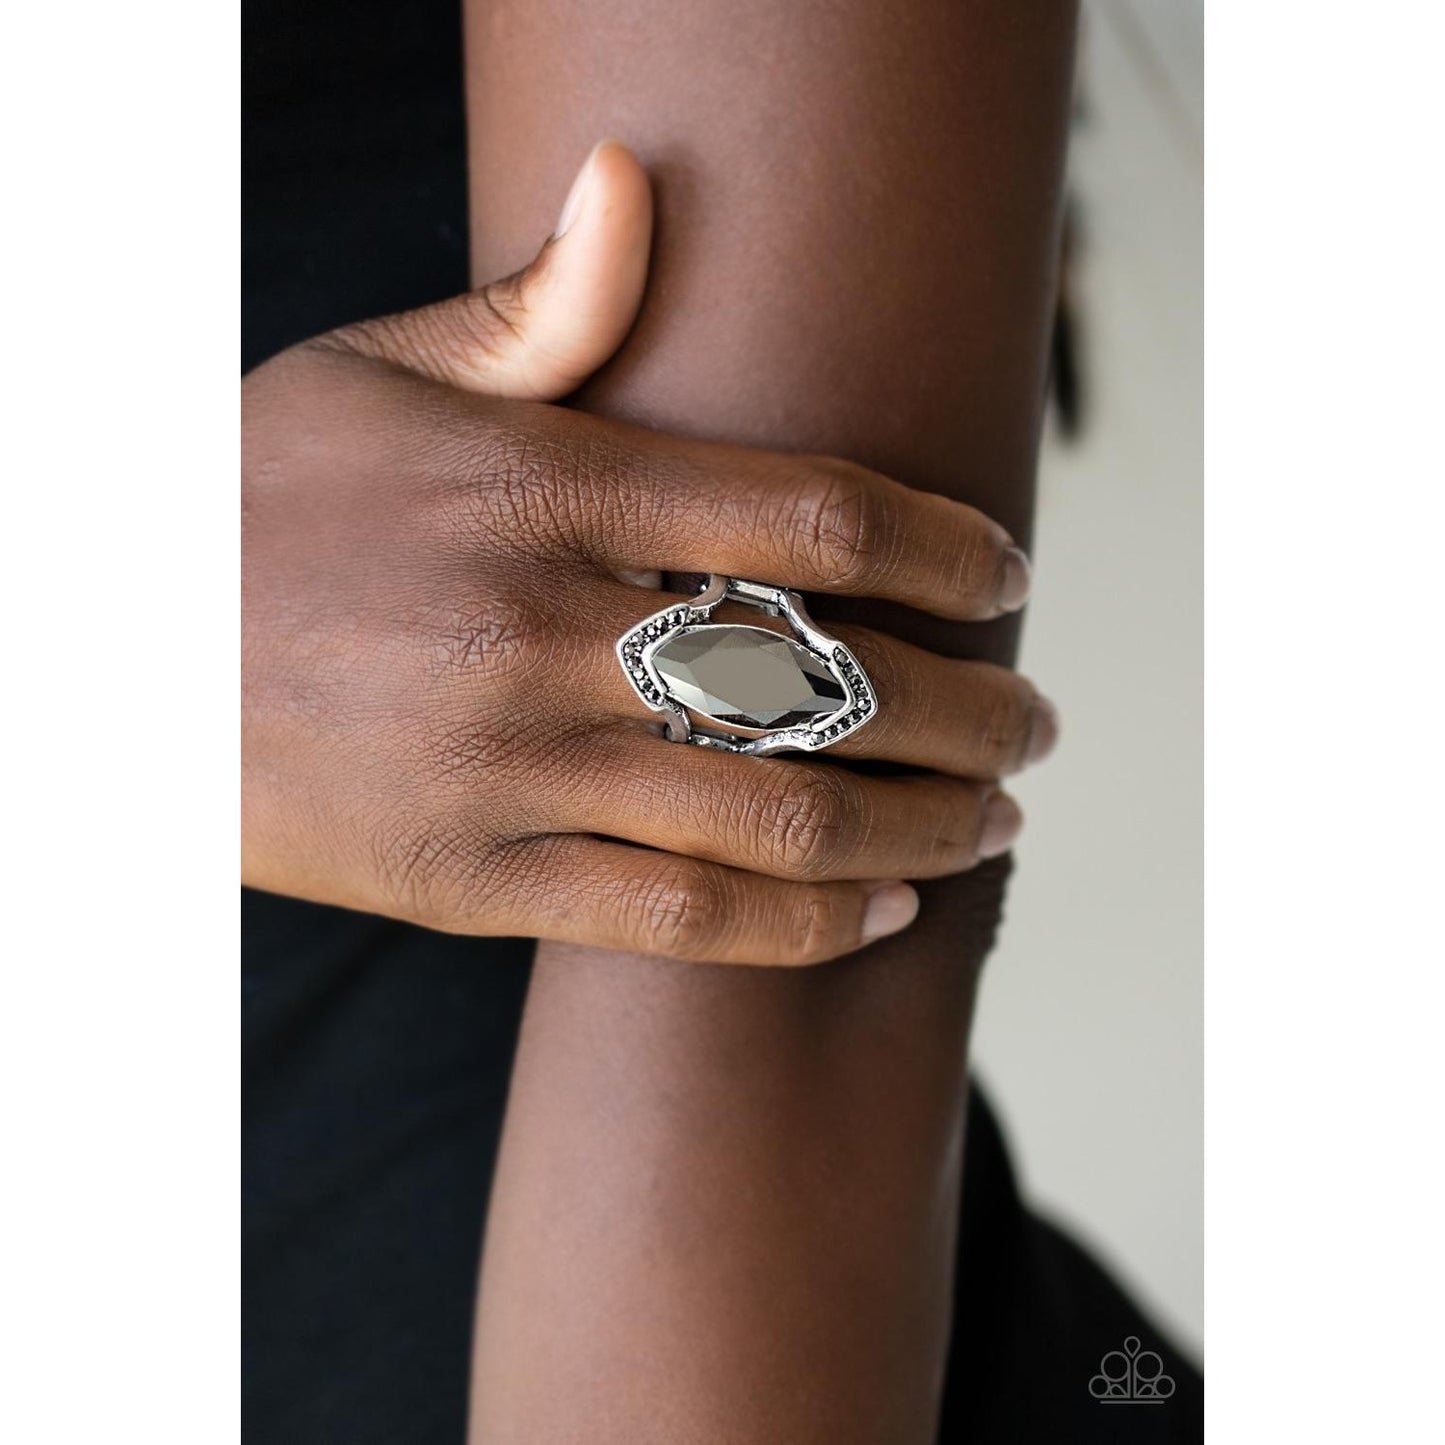 Leading Luster - Silver Ring